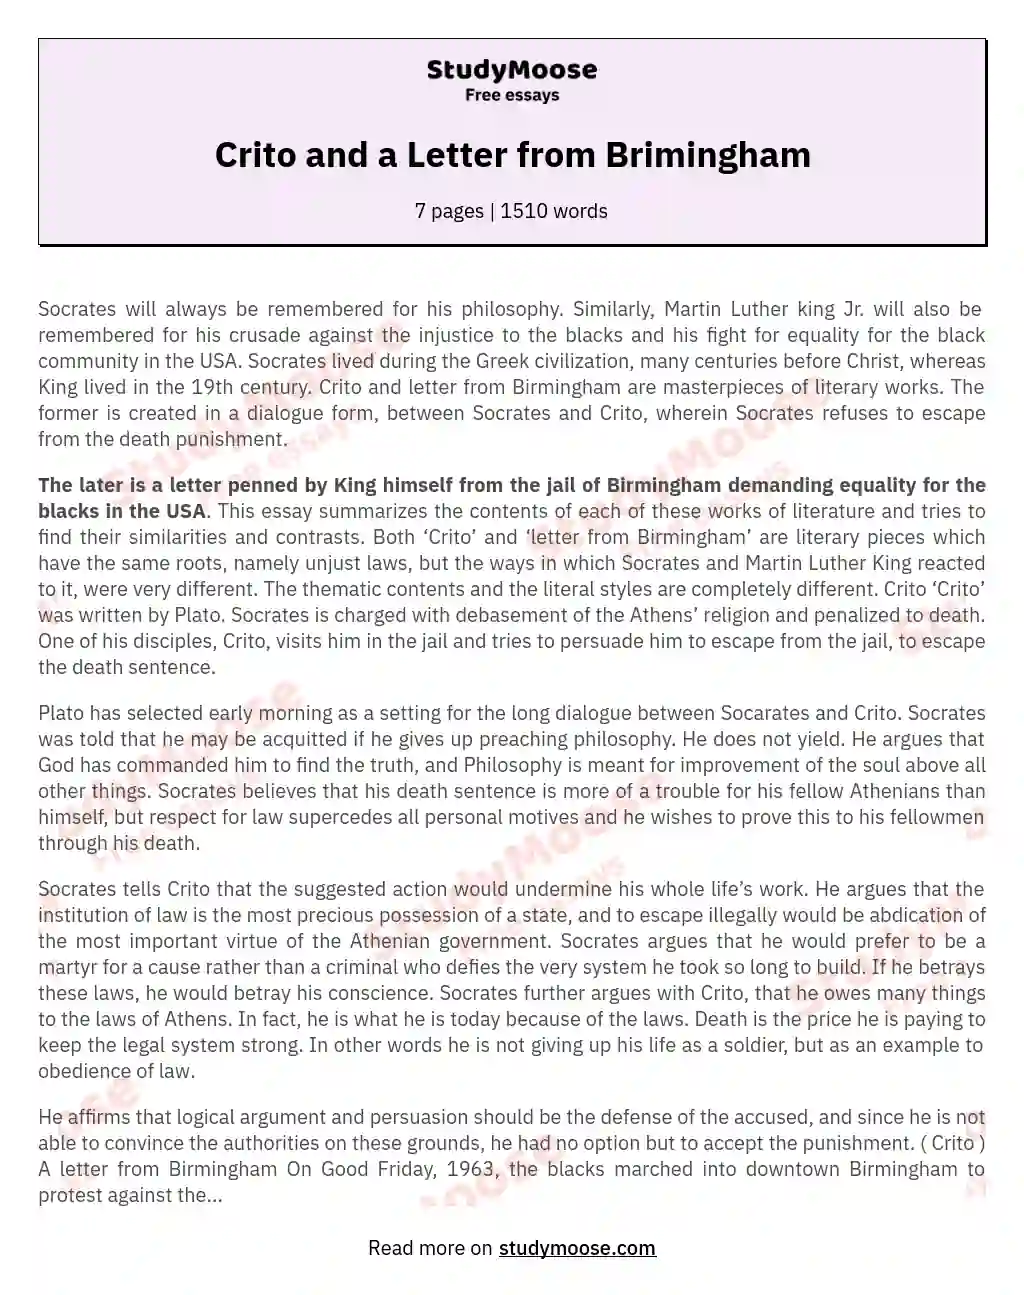 Crito and a Letter from Brimingham essay